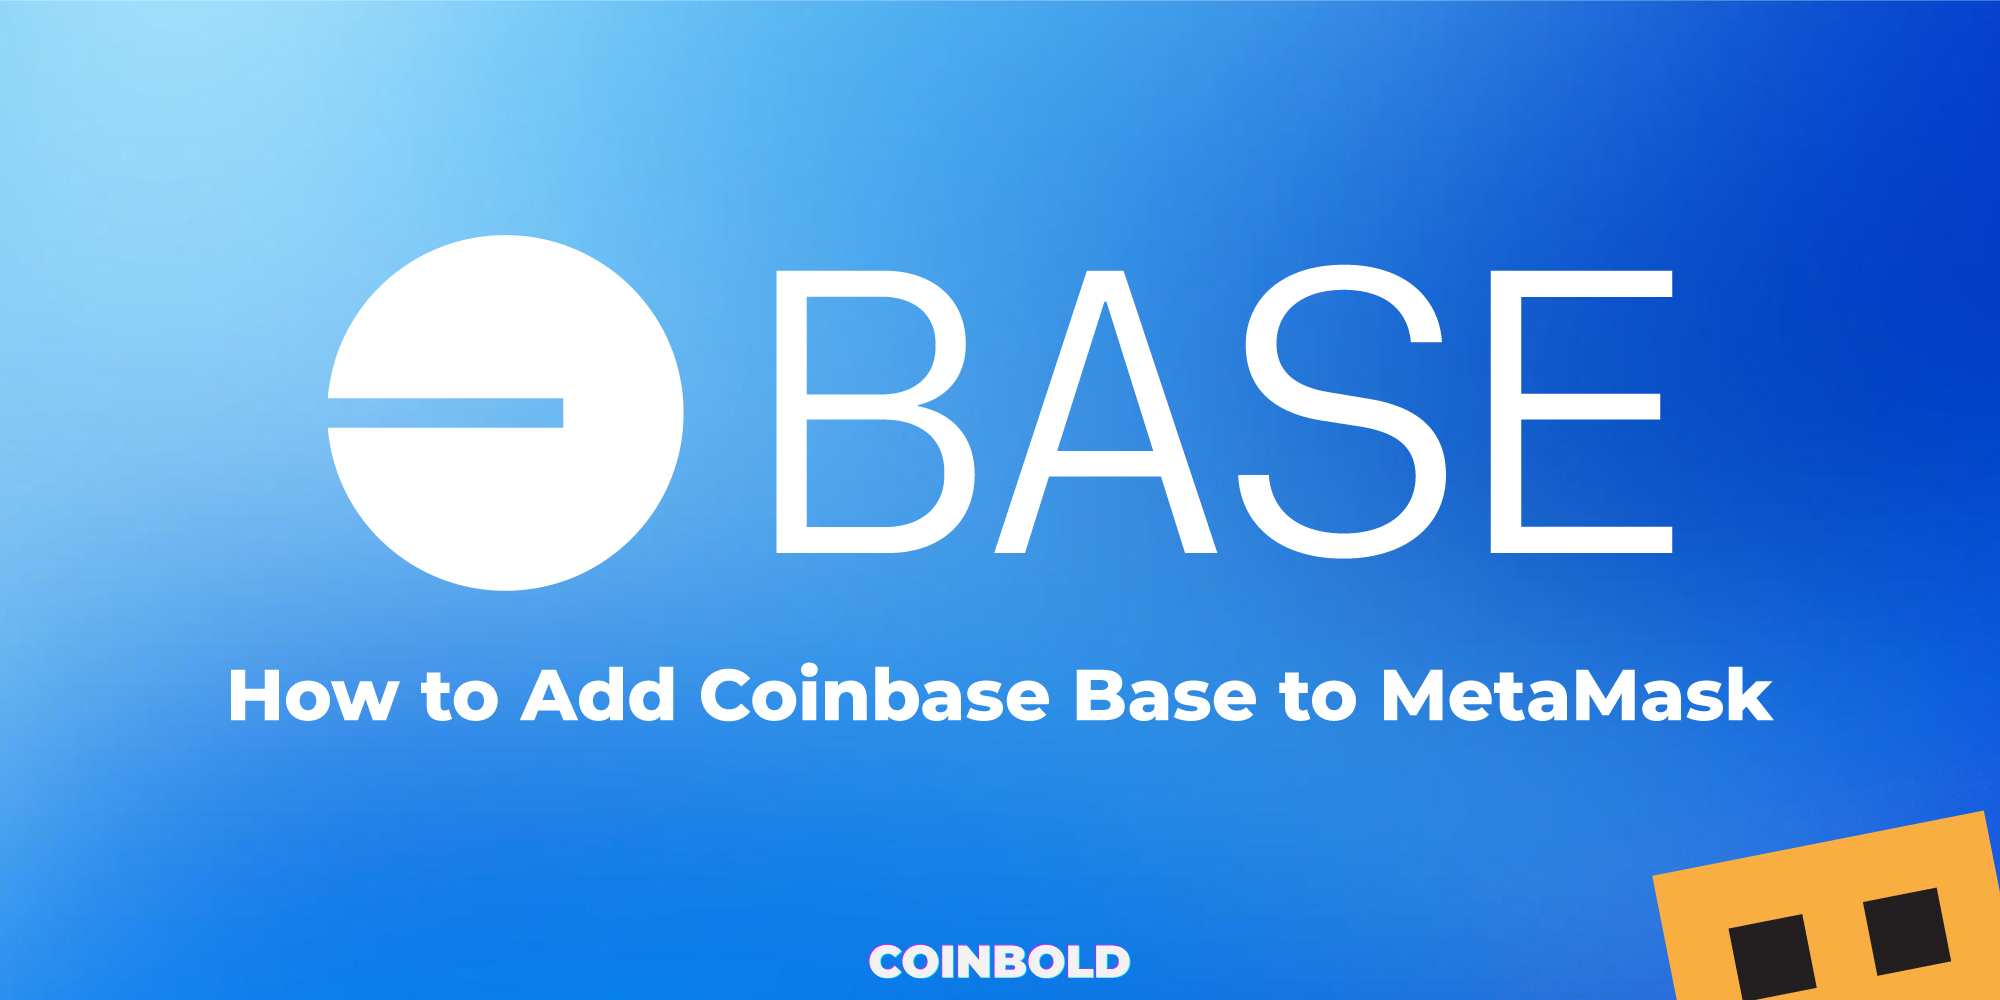 How to Add Coinbase Base to MetaMask